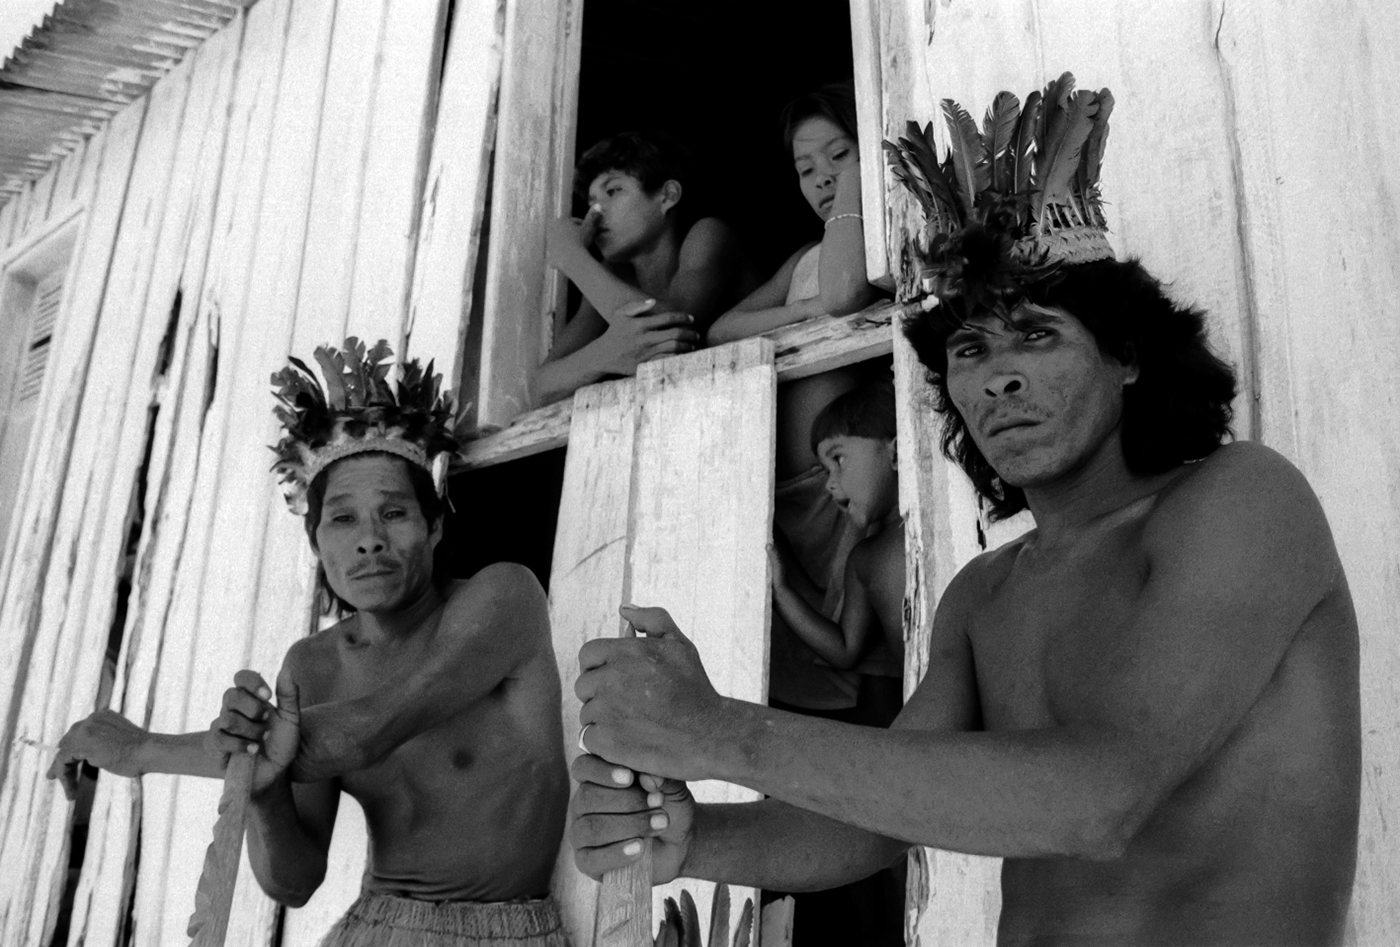 bahia Brasil Pataxó Monte Pascoal indigenous native people Visibility rights Anthropology exploration